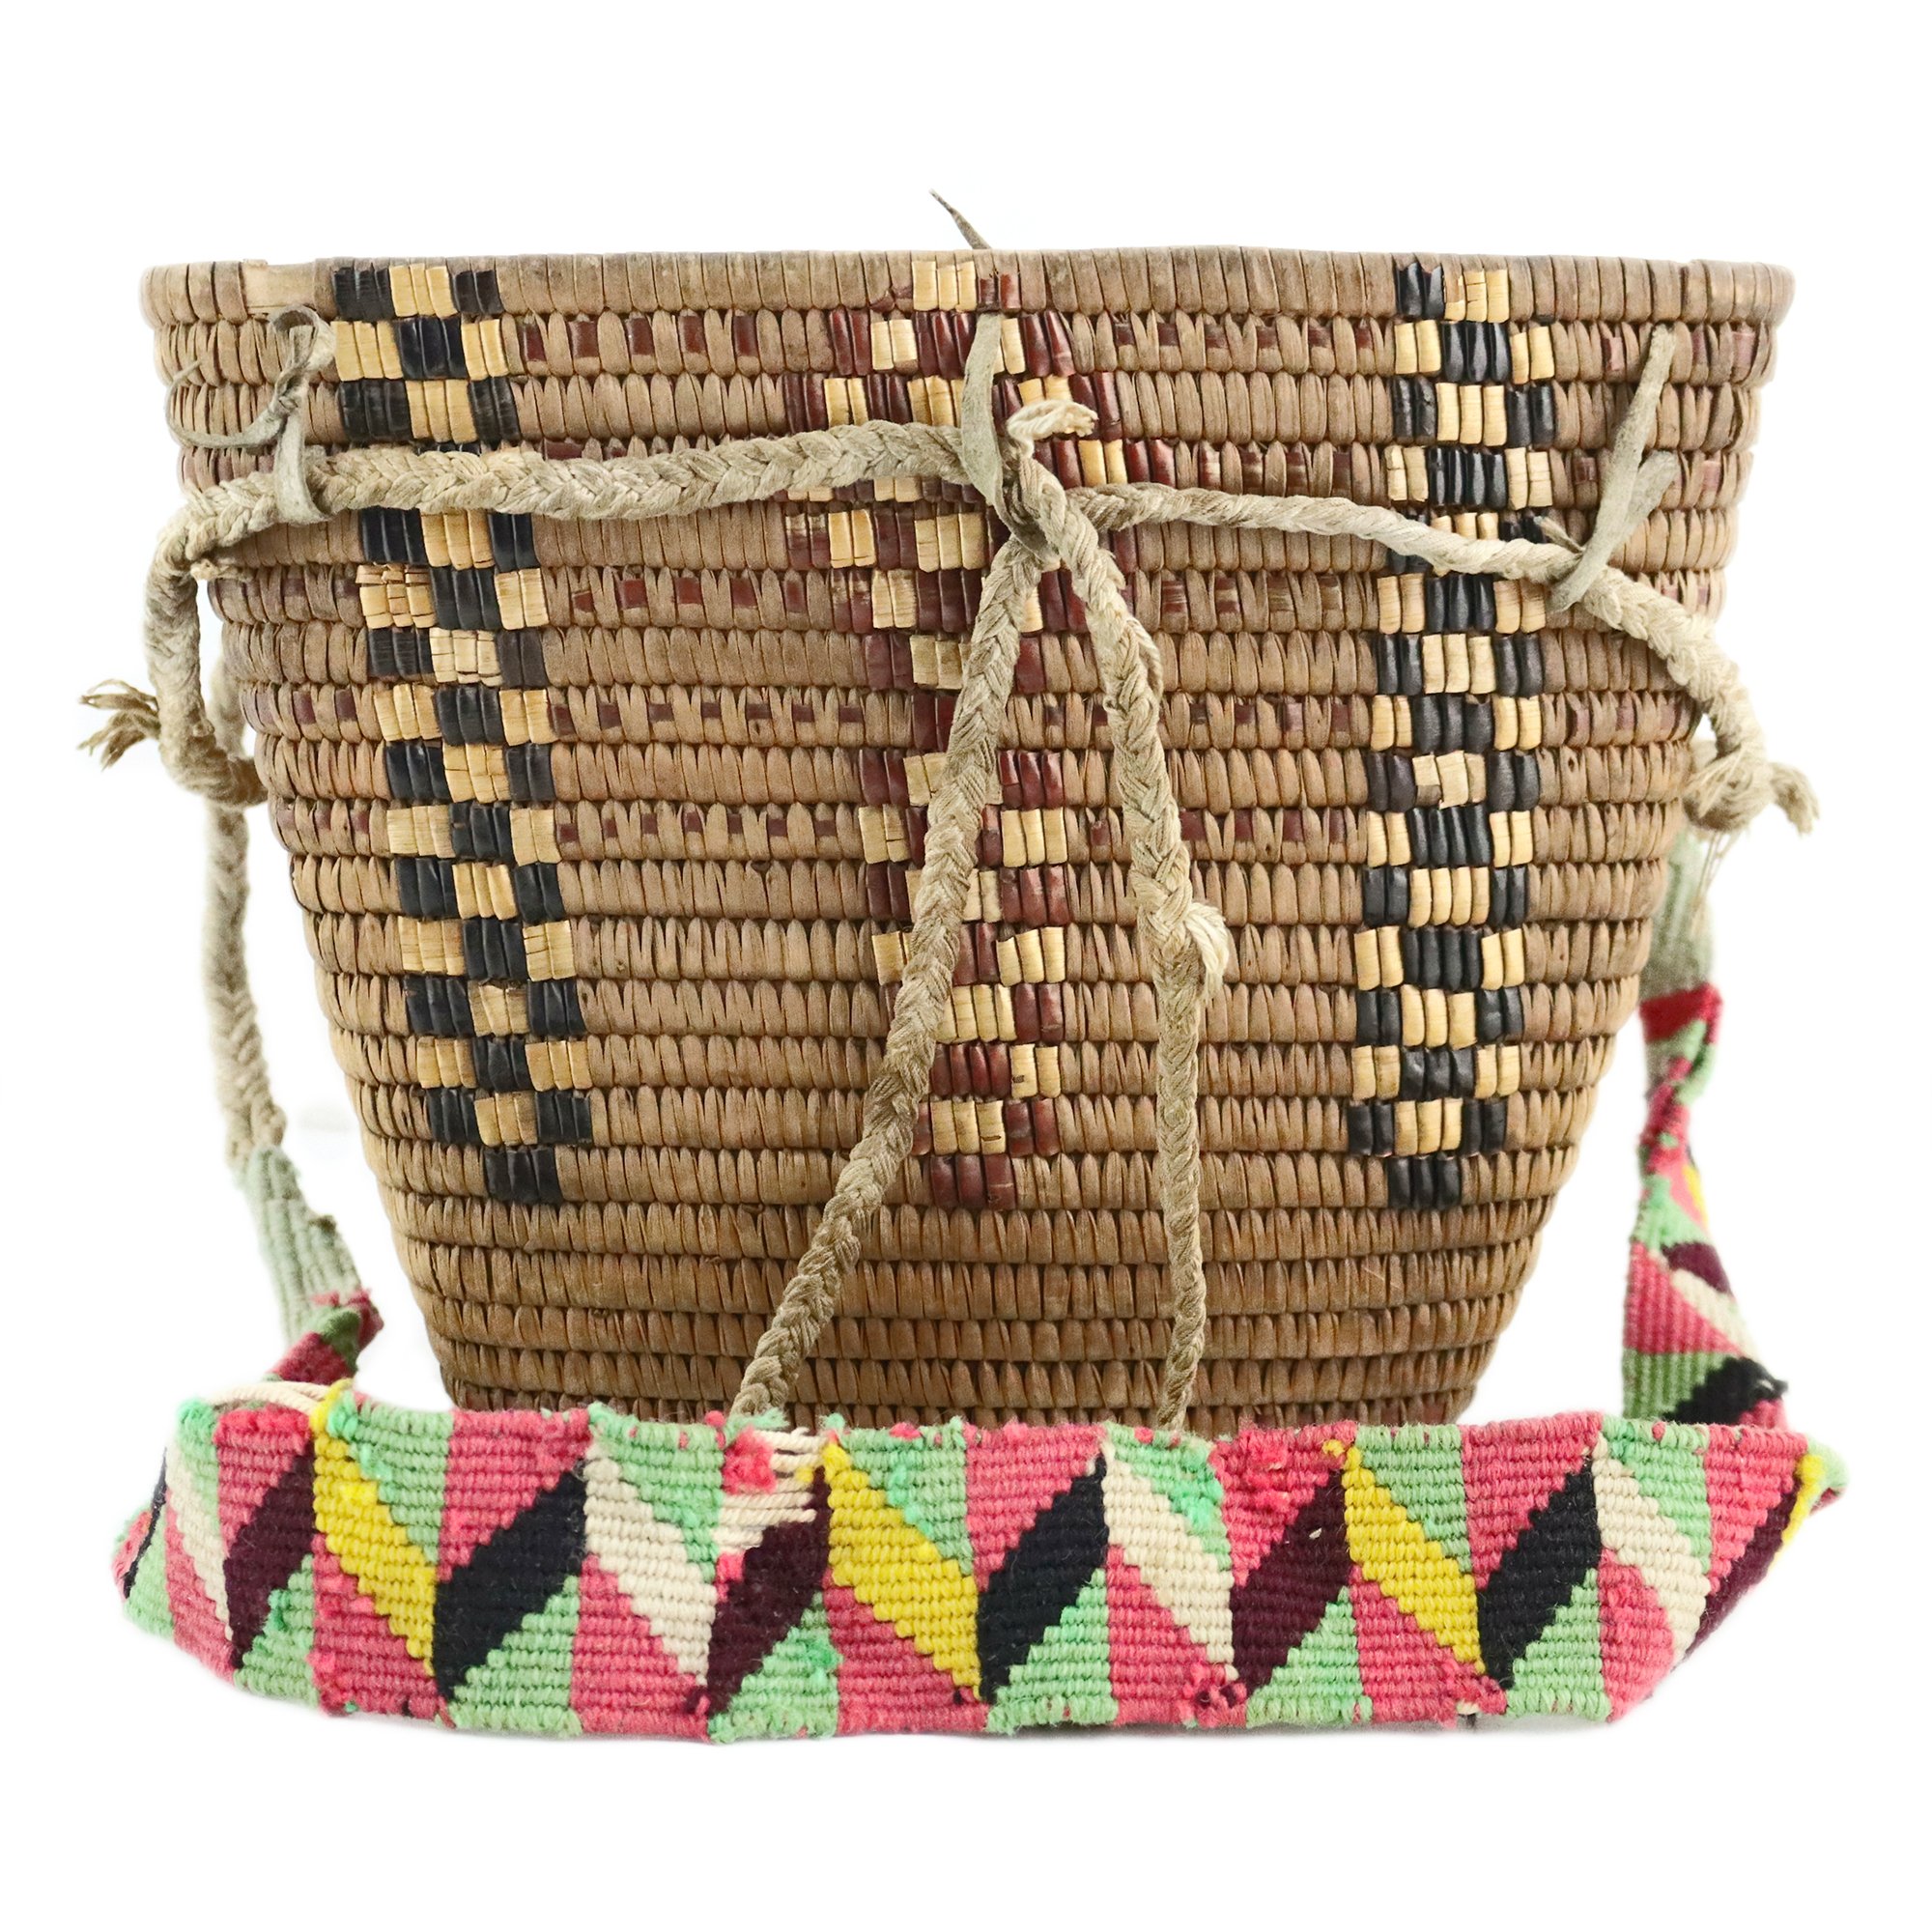 Large Cedar Root Berry Basket Complete with Tumpline, early 20th century